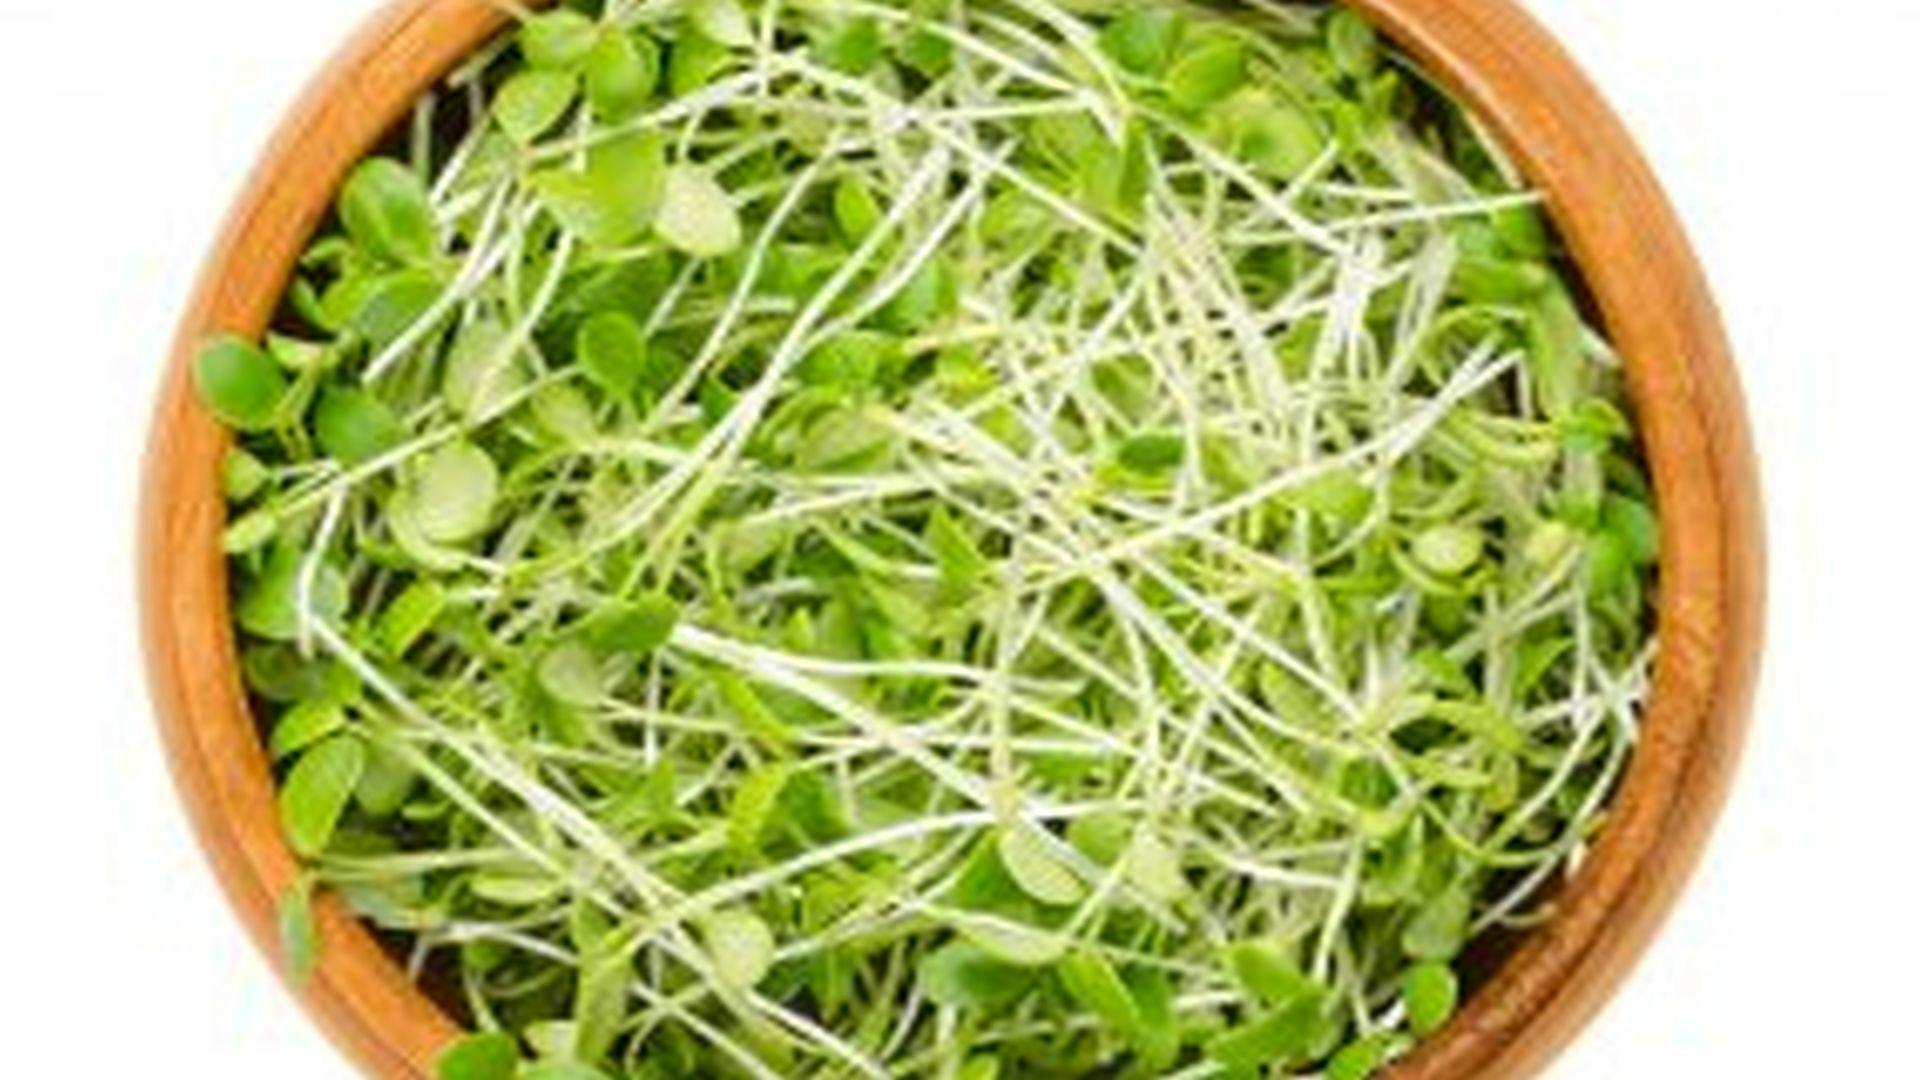 Multistate Outbreak of Salmonella Montevideo Infections Linked to Raw Sprouts